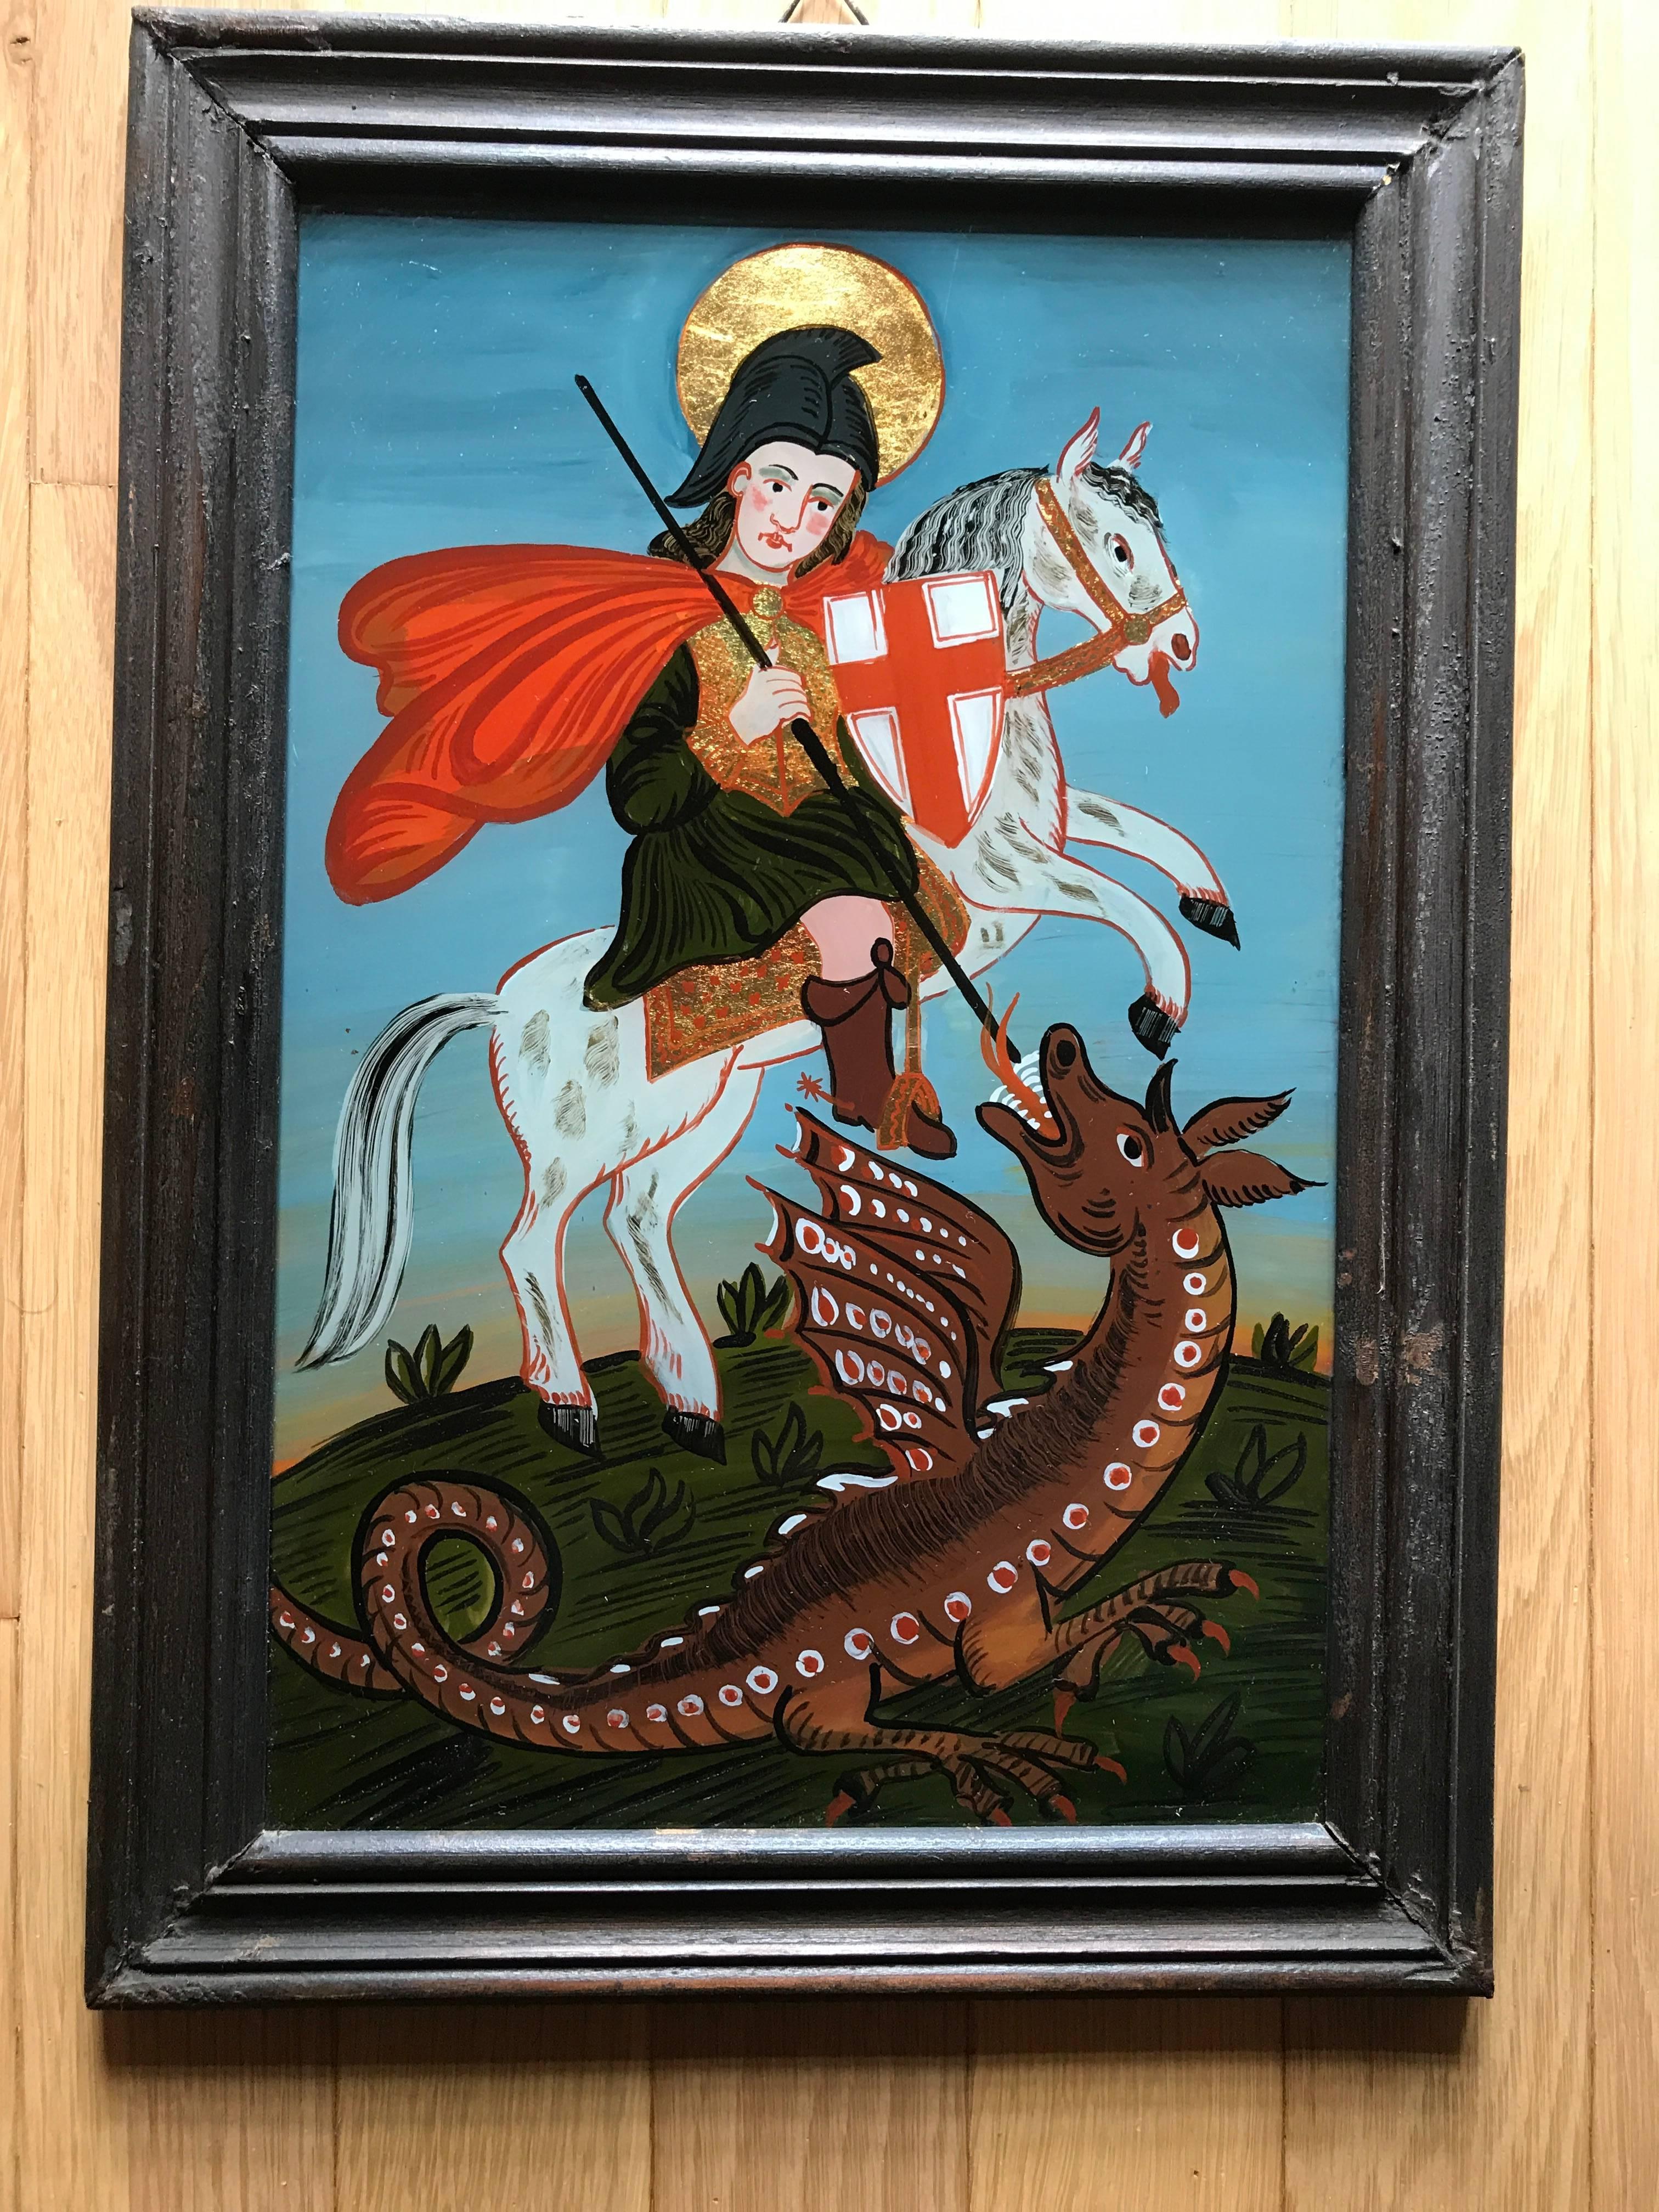 Verre églomisé, or reverse glass painting with gilding of Saint George and the Dragon. St George shown riding his steed, slaying the dragon with his spear. In a period black painted frame. The wonderful aspect of reverse glass painting is the